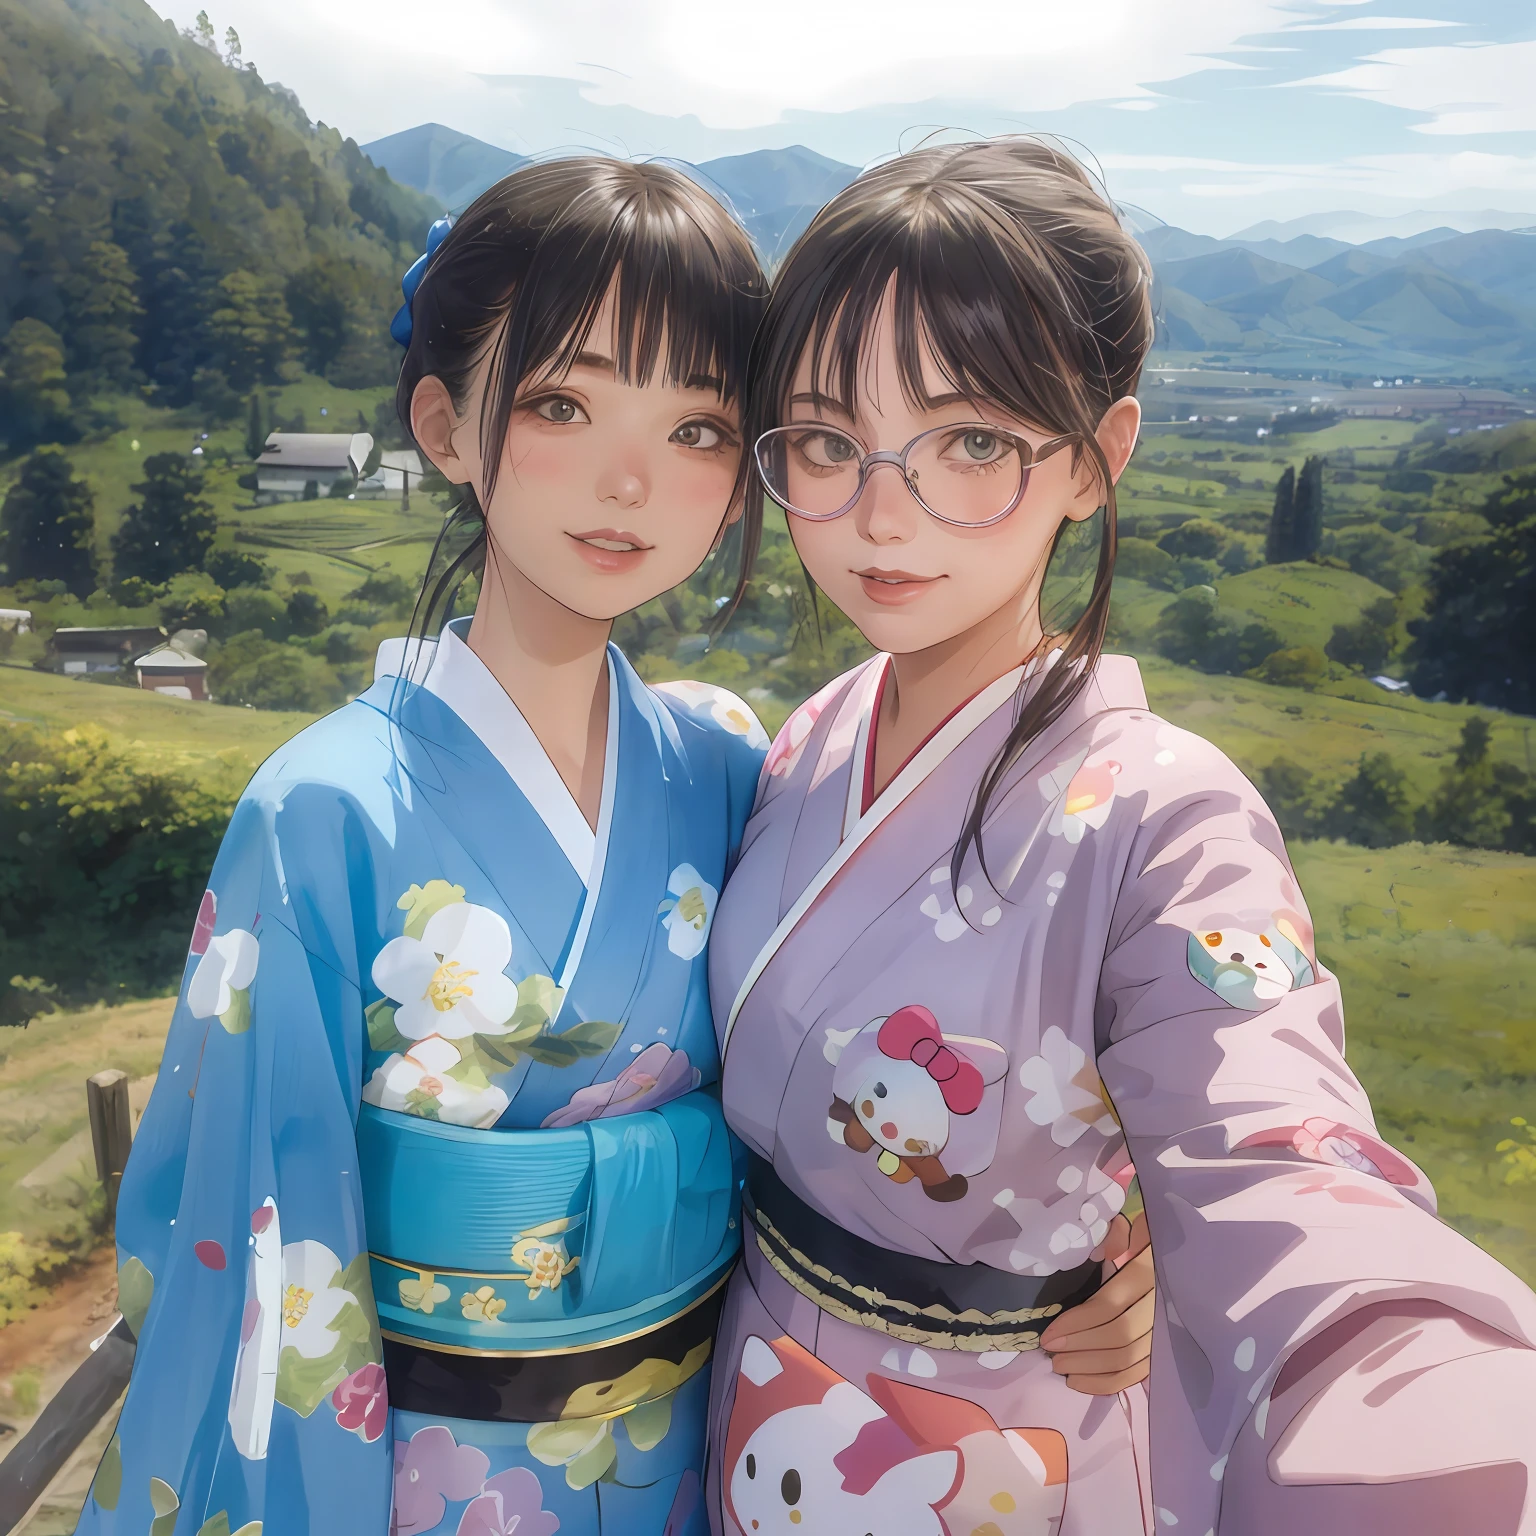 A Japan young Russian girl in a blue kimono and a young Russian girl wearing a purple kimono with lots of Sanrio characters printed on it and round glasses on her face are taking a selfie. Japan girl puts her hands on the waist of a Russian girl. The background is a farming village in Nara Prefecture in Japan, a landscape seen from a high mountain, with a blue sky, distant mountains, spreading fields and greenery